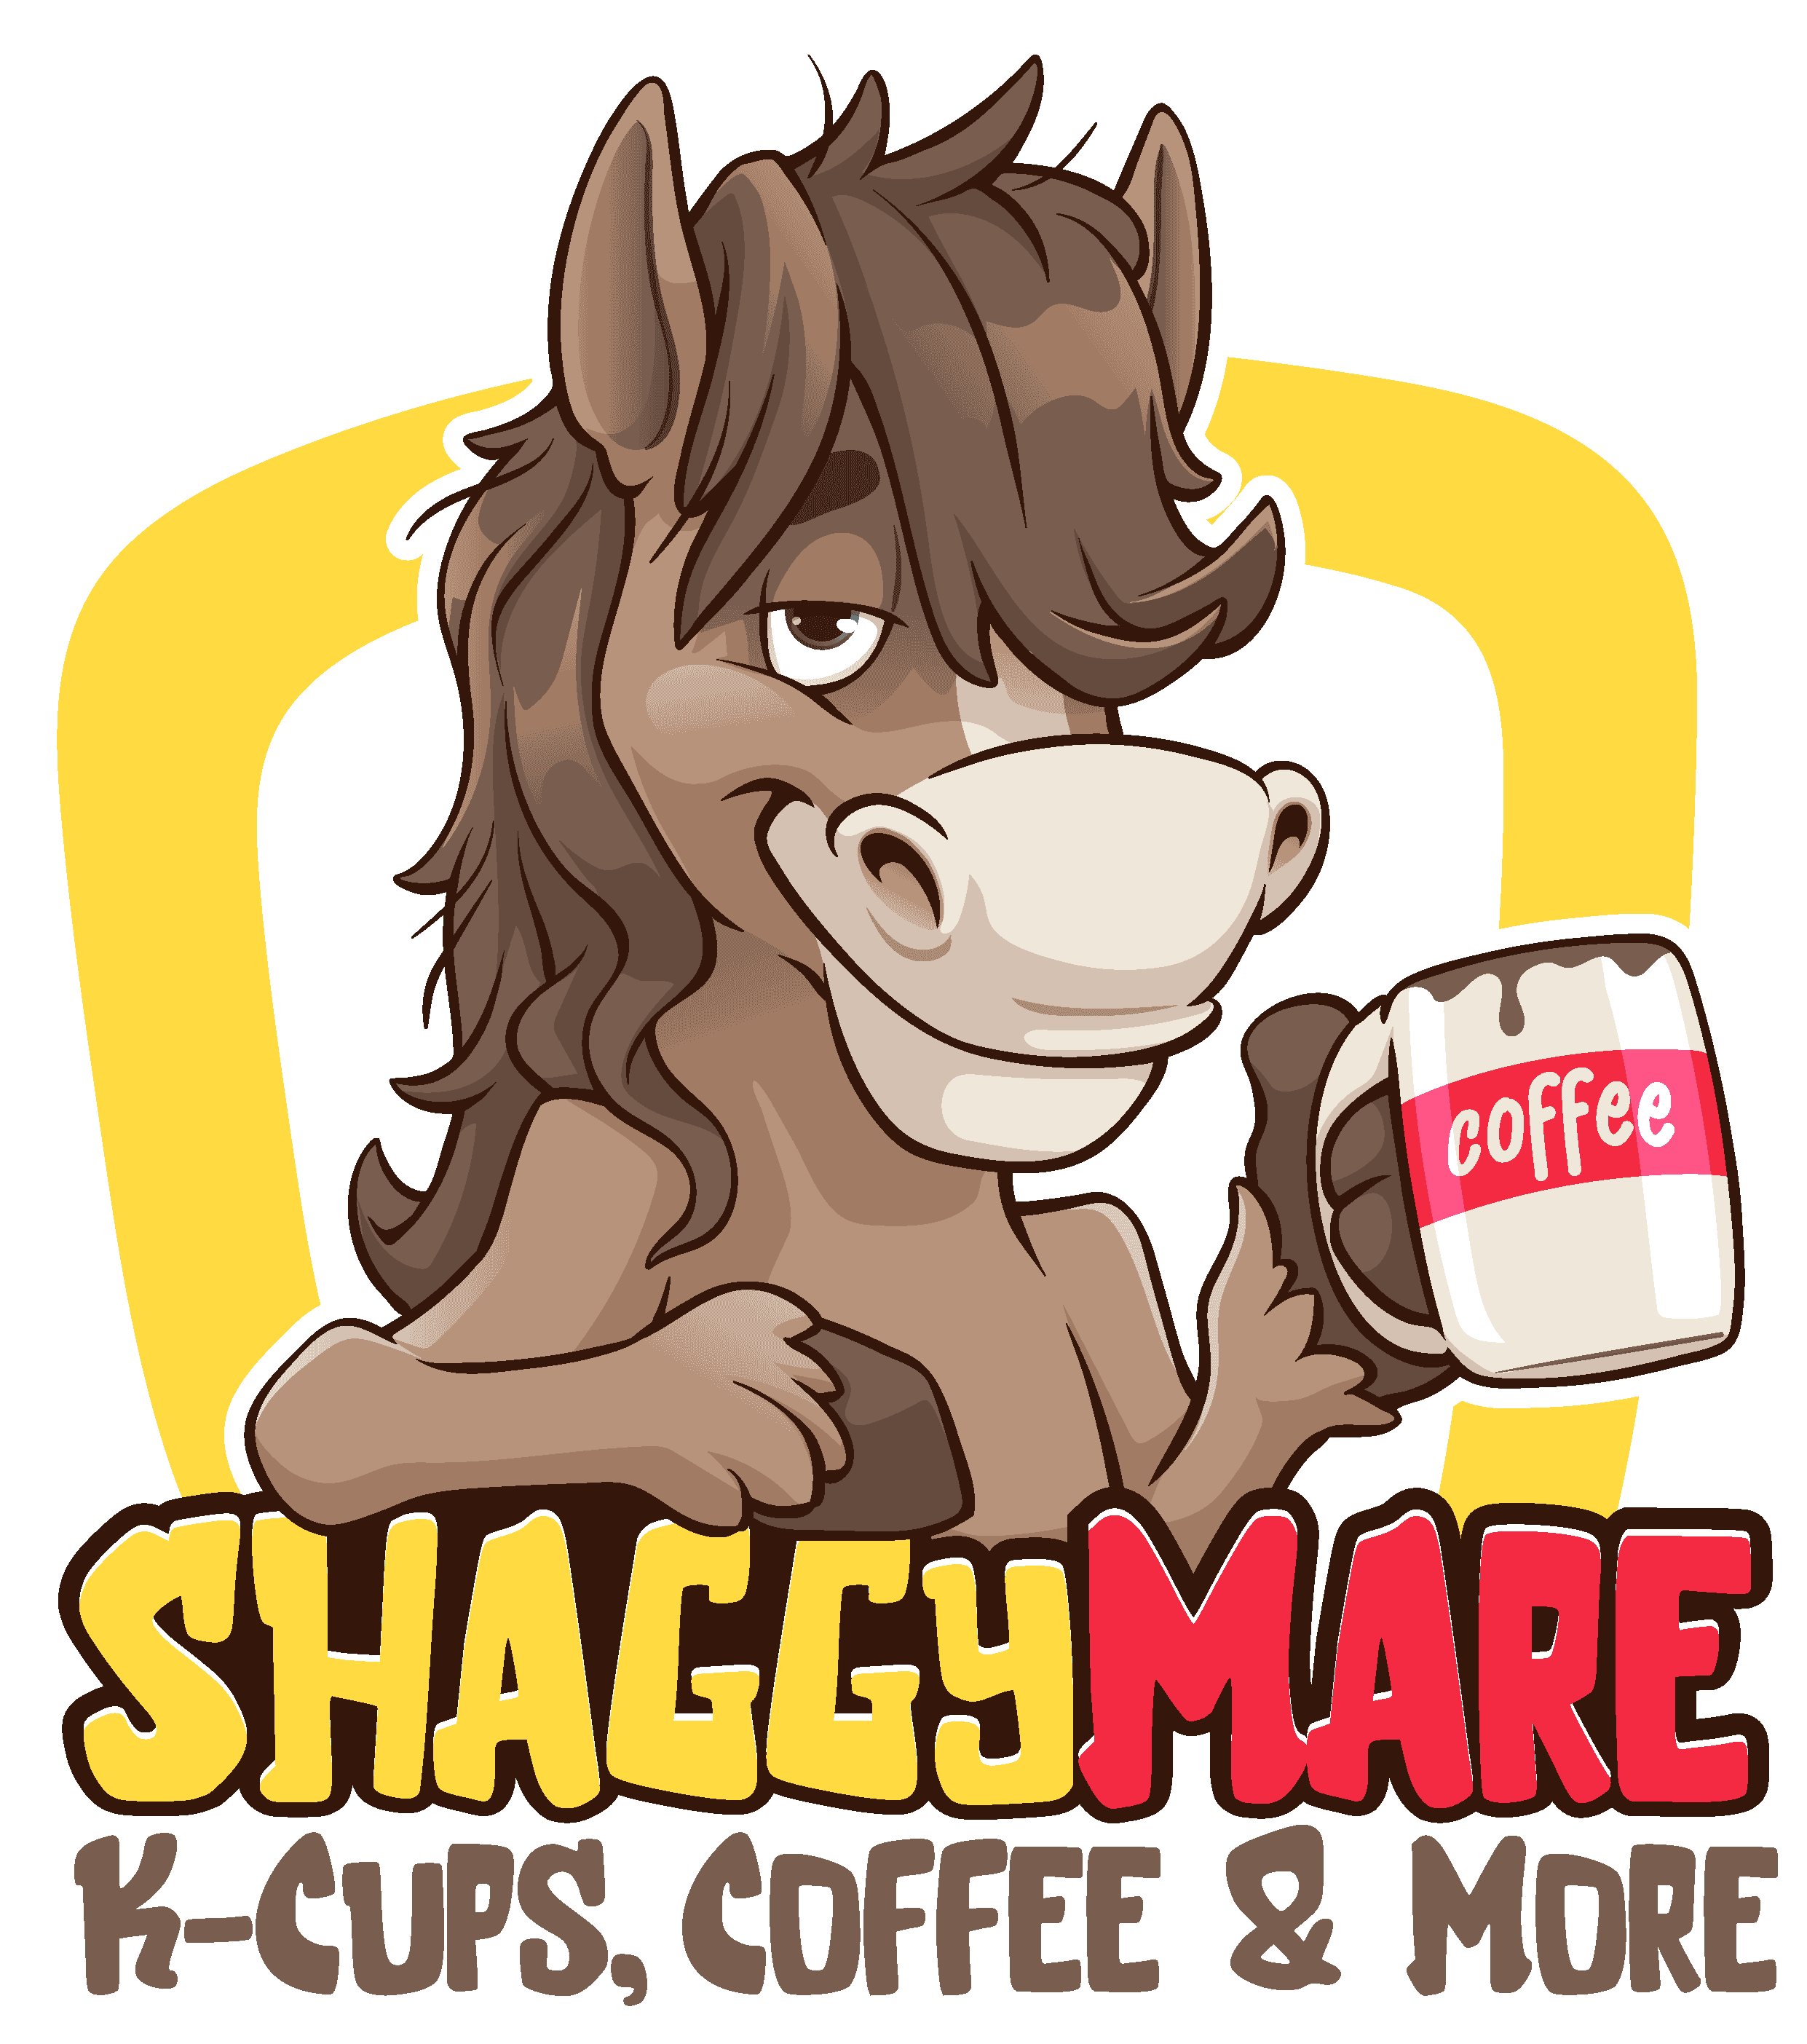 Shaggy Mare K-Cups Coffee & More